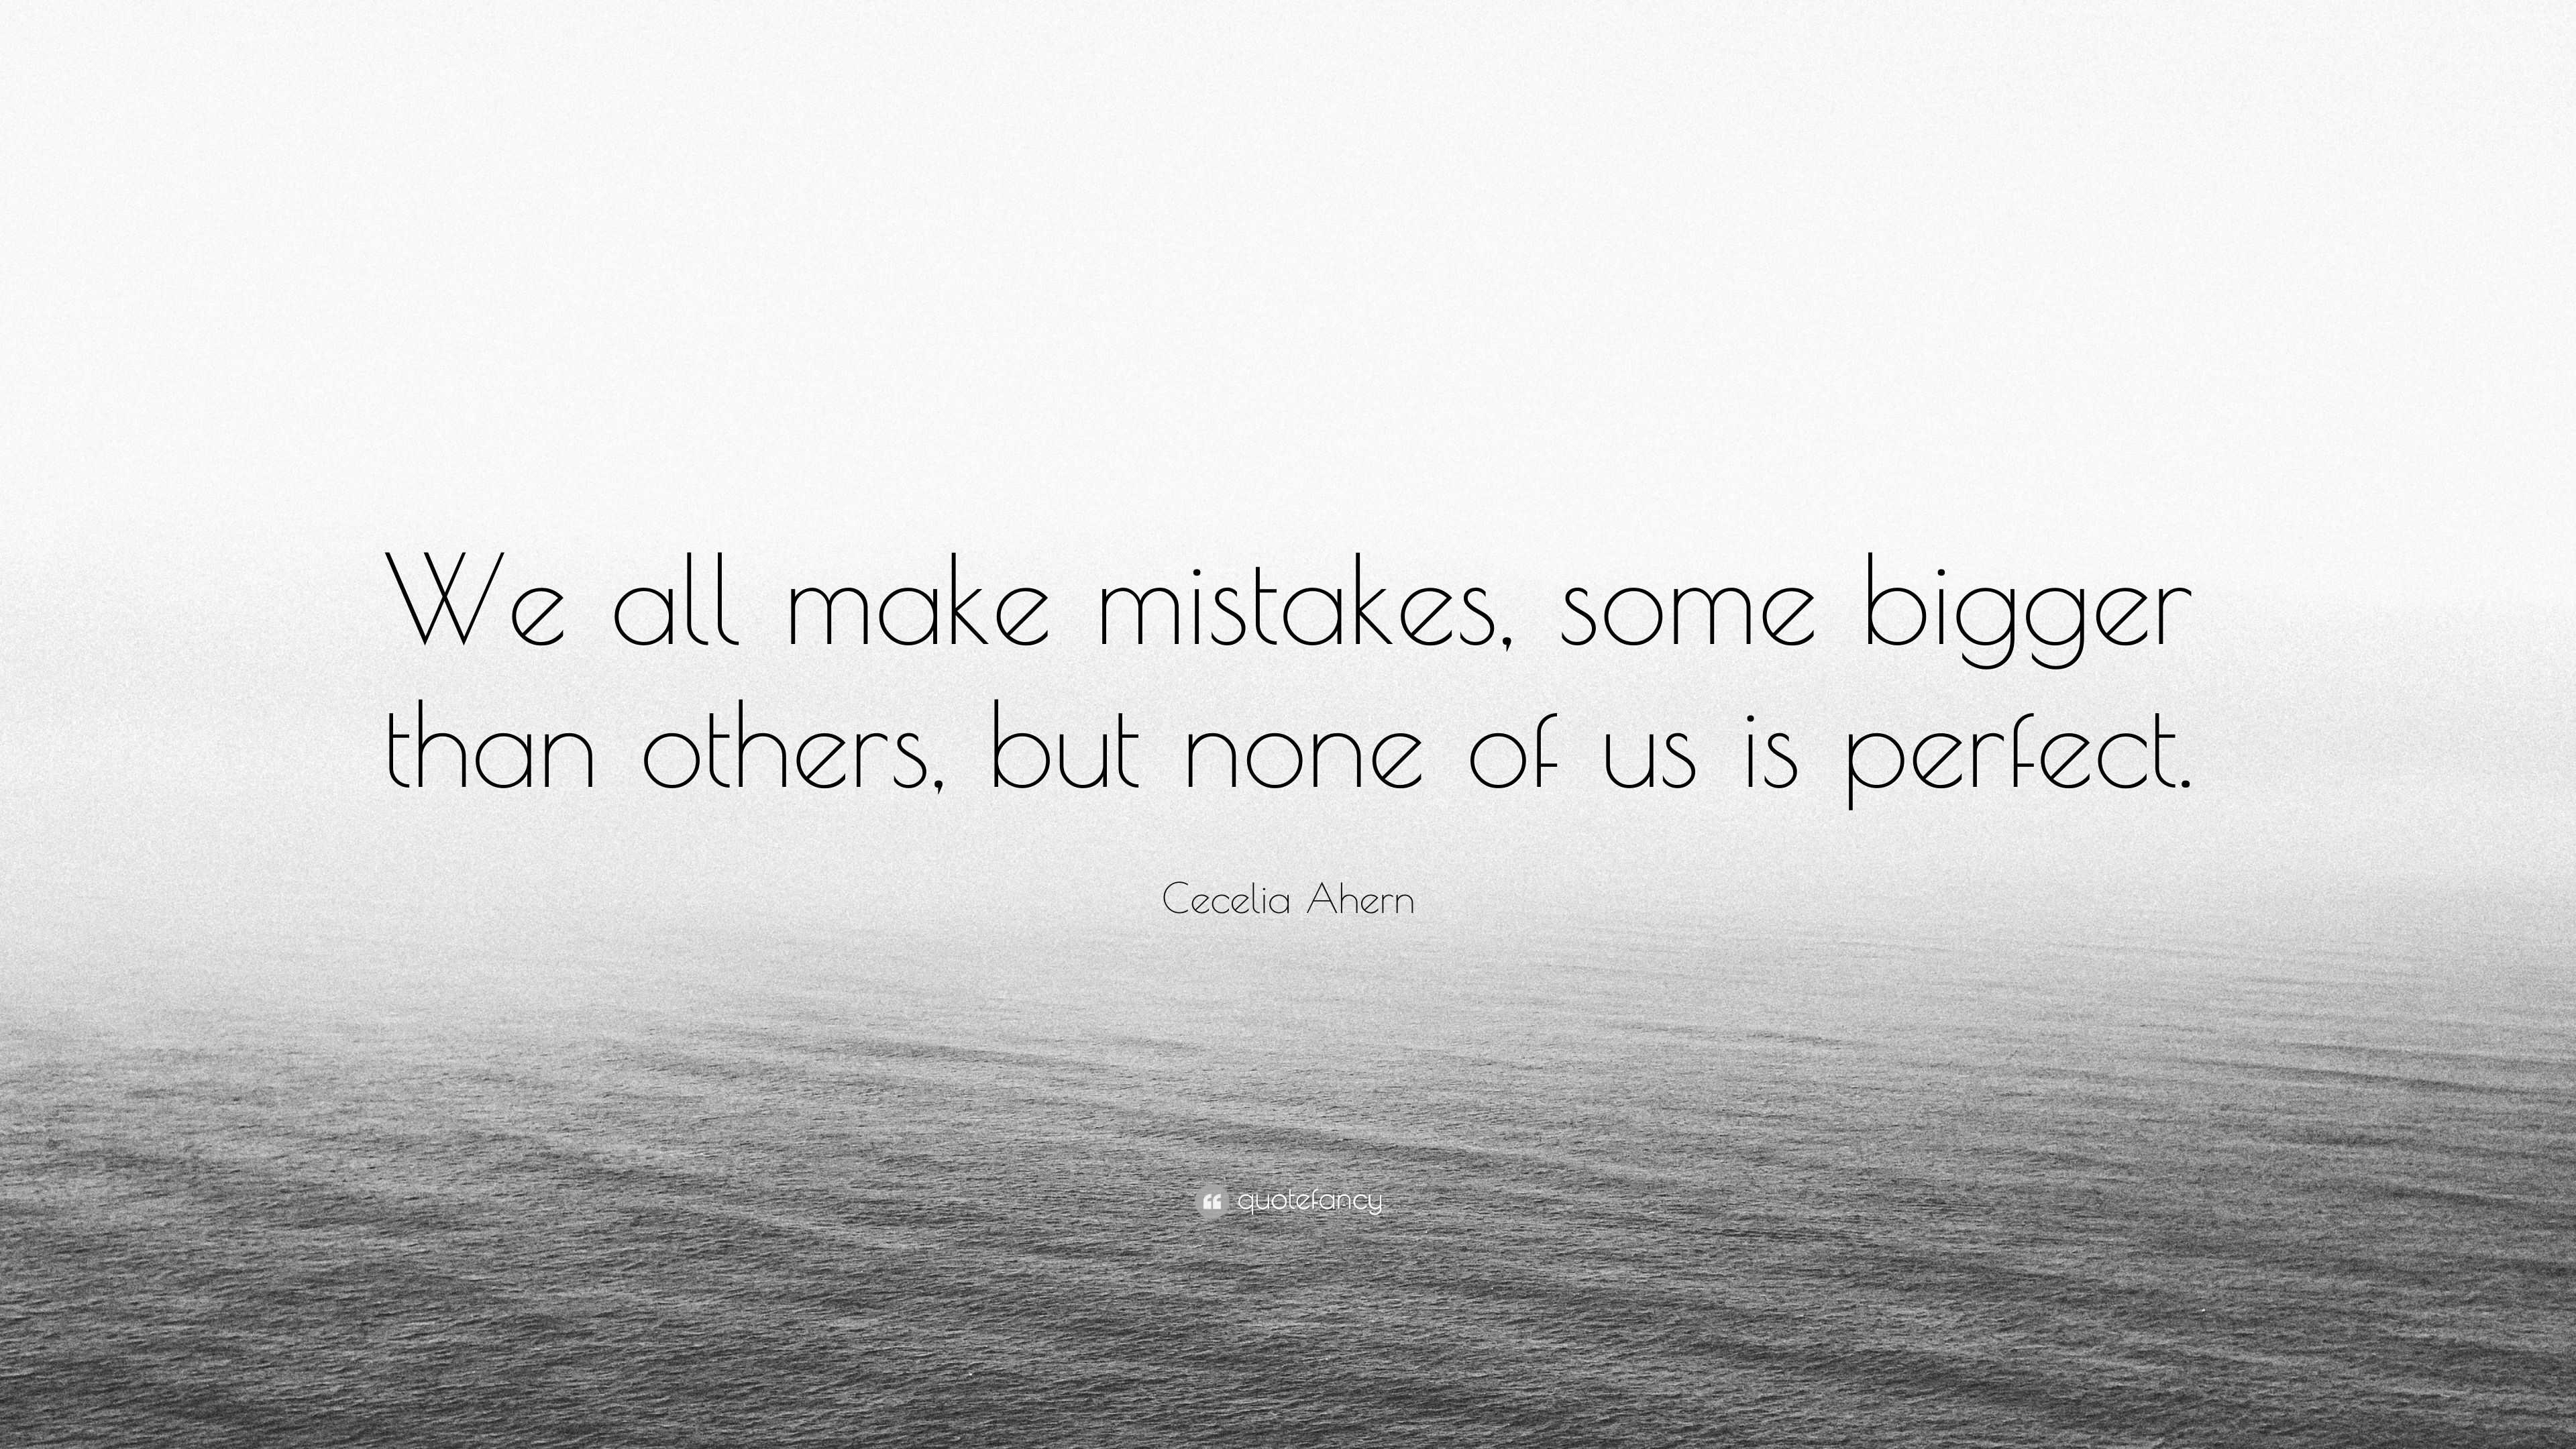 Cecelia Ahern Quote: "We all make mistakes, some bigger ...